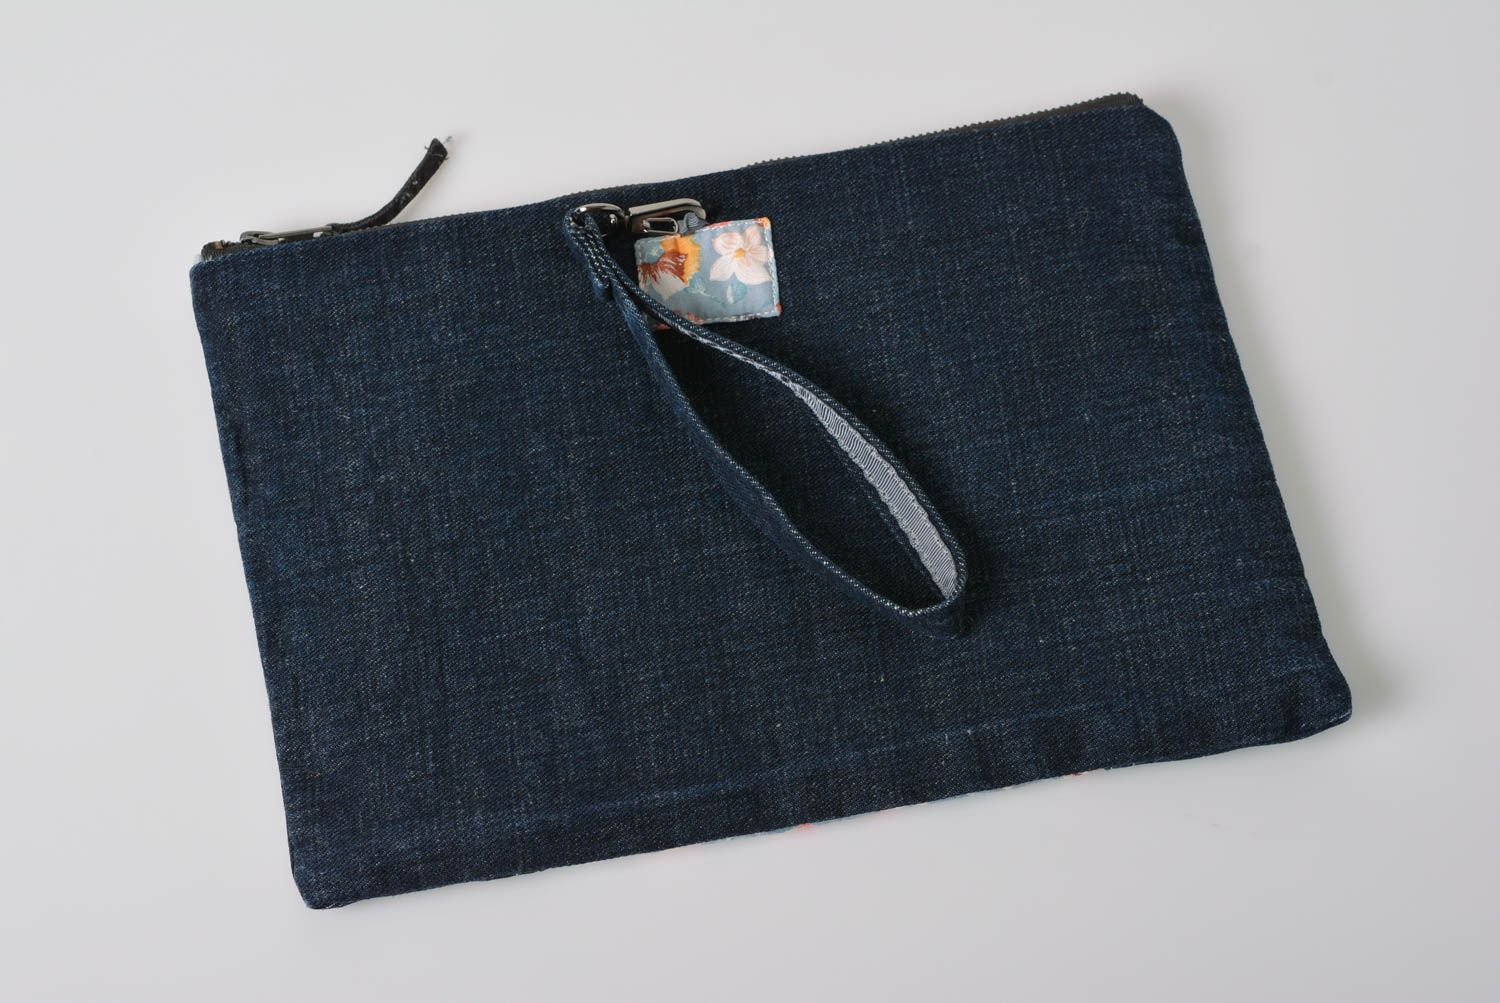 Small clutch bag made of denim with cotton insert and zipper ladies purse photo 2